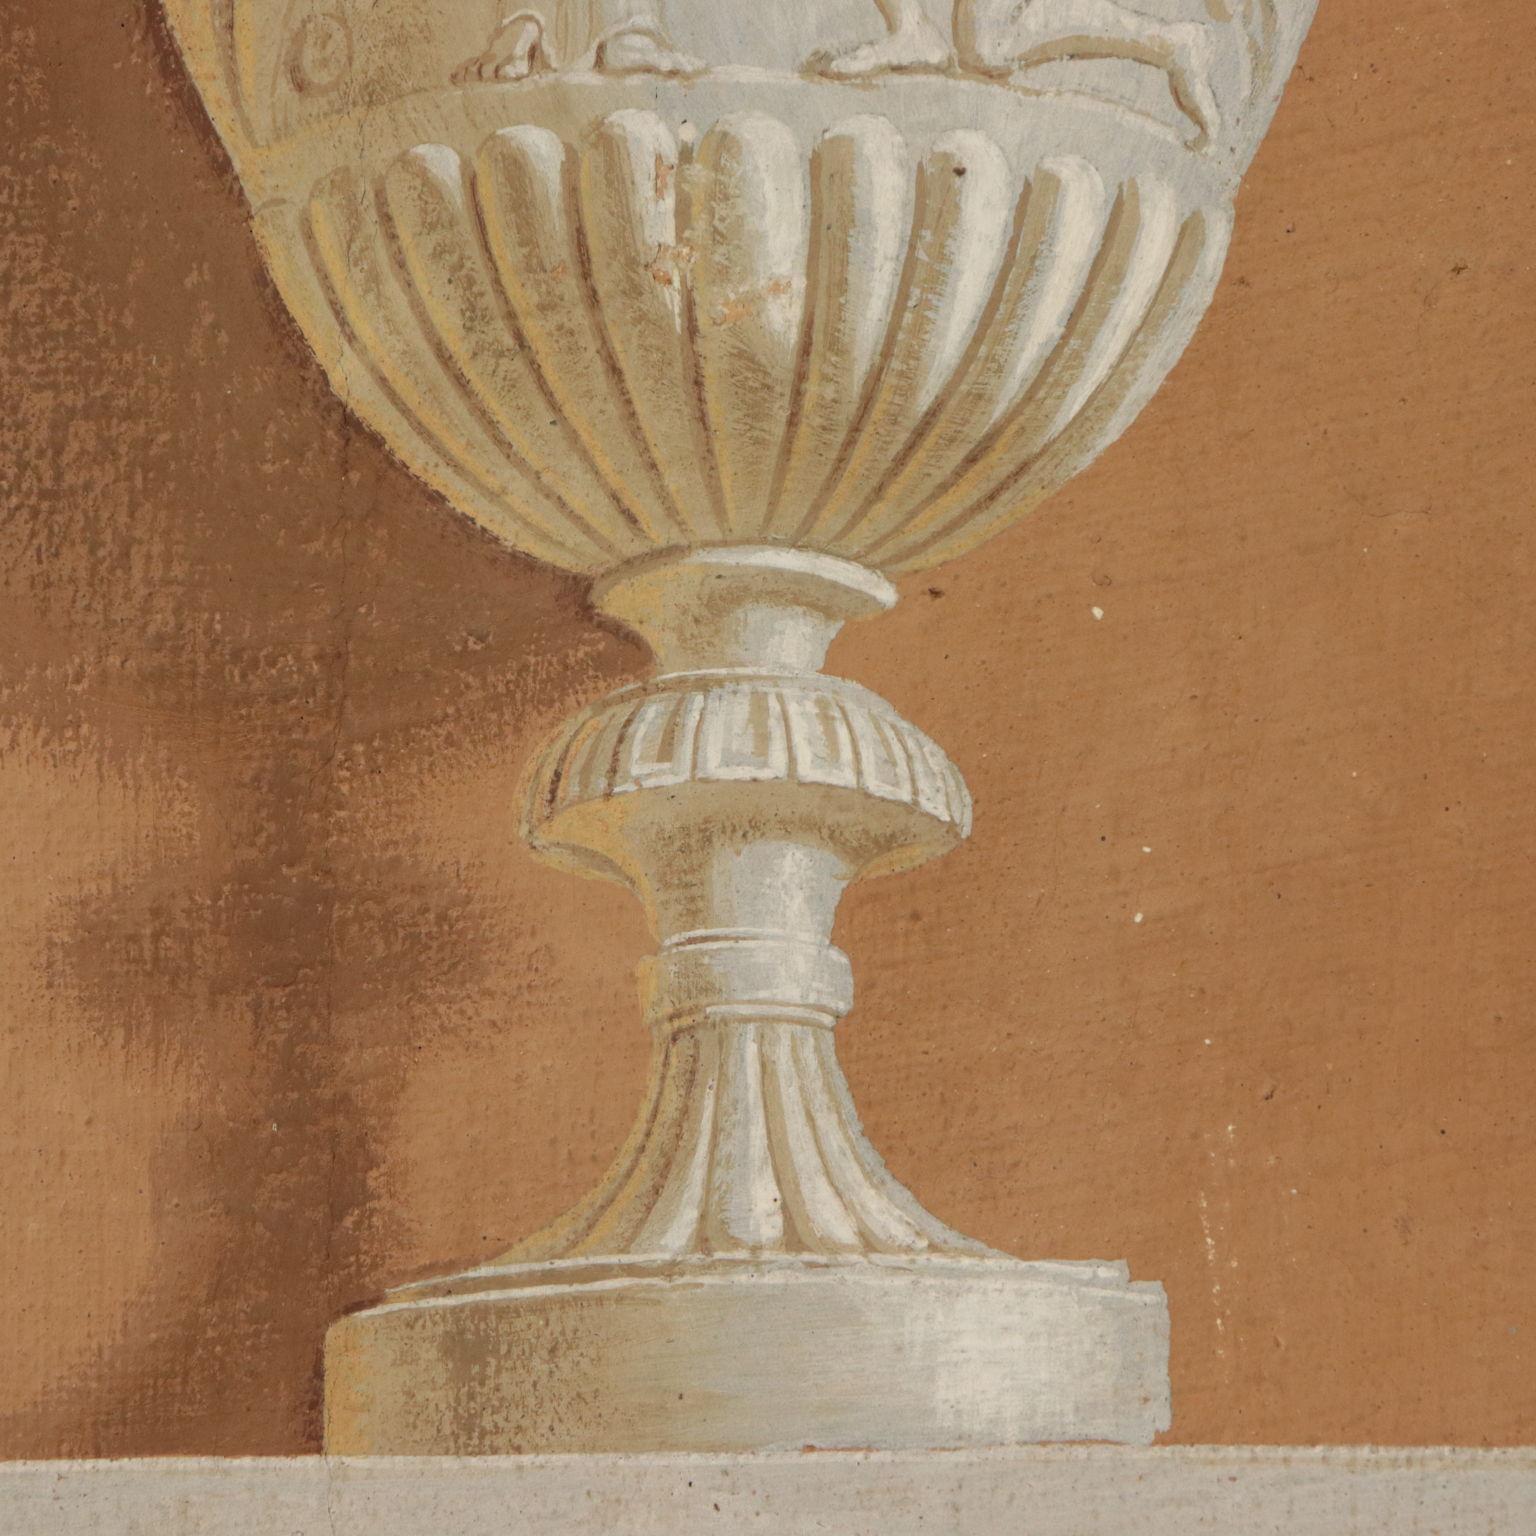 Tempera on canvas. Decorative element from a Lombard mansion house. It depicts a vase decorated with a Neoclassical scene depicting figures and friezes. The style underlines the plasticity of the element like it was a real marble vase on its base